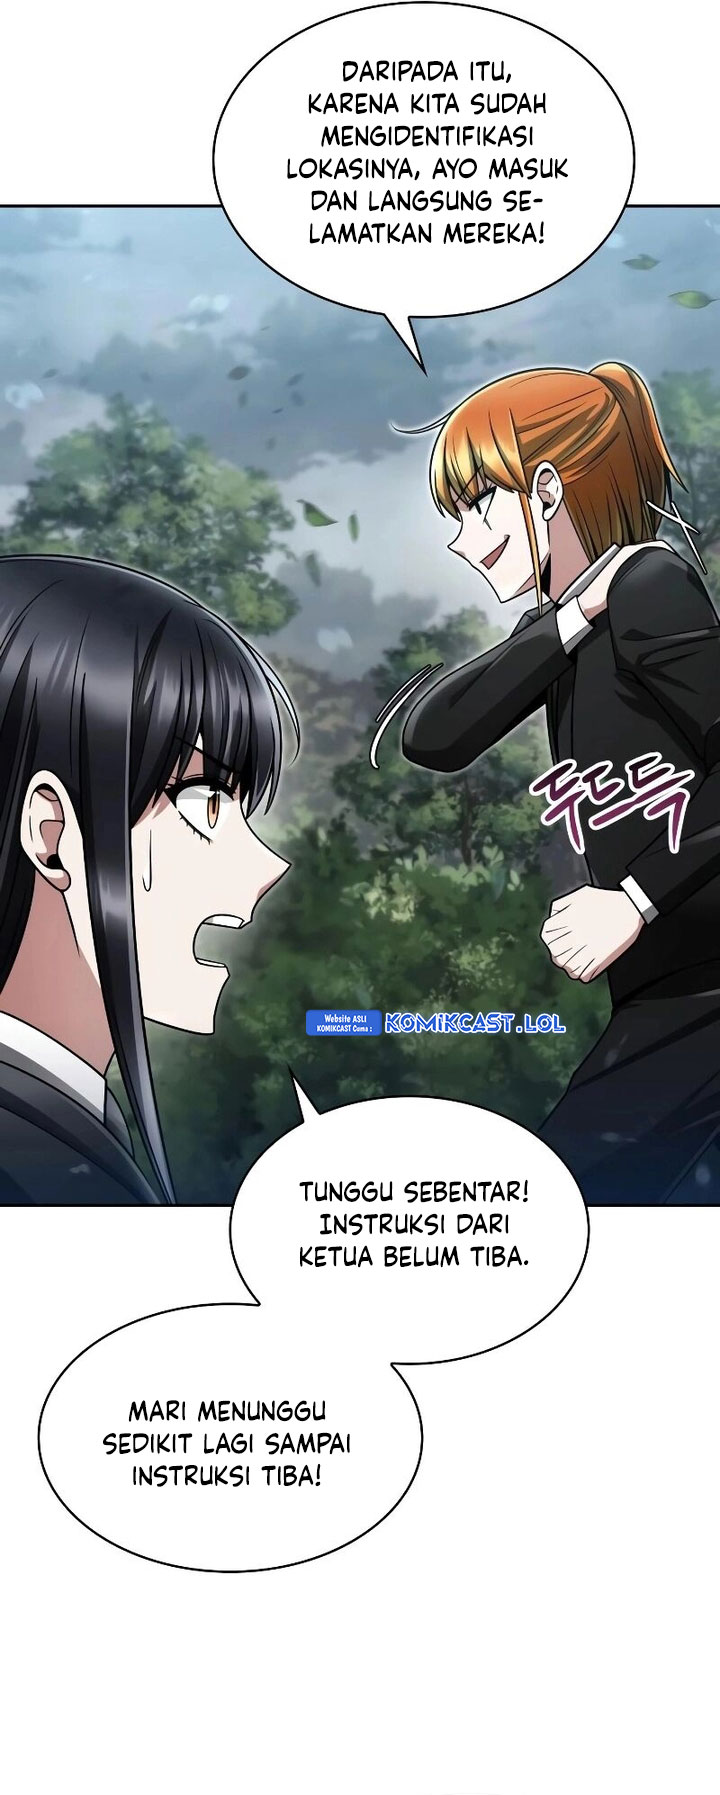 Dilarang COPAS - situs resmi www.mangacanblog.com - Komik clever cleaning life of the returned genius hunter 065 - chapter 65 66 Indonesia clever cleaning life of the returned genius hunter 065 - chapter 65 Terbaru 9|Baca Manga Komik Indonesia|Mangacan